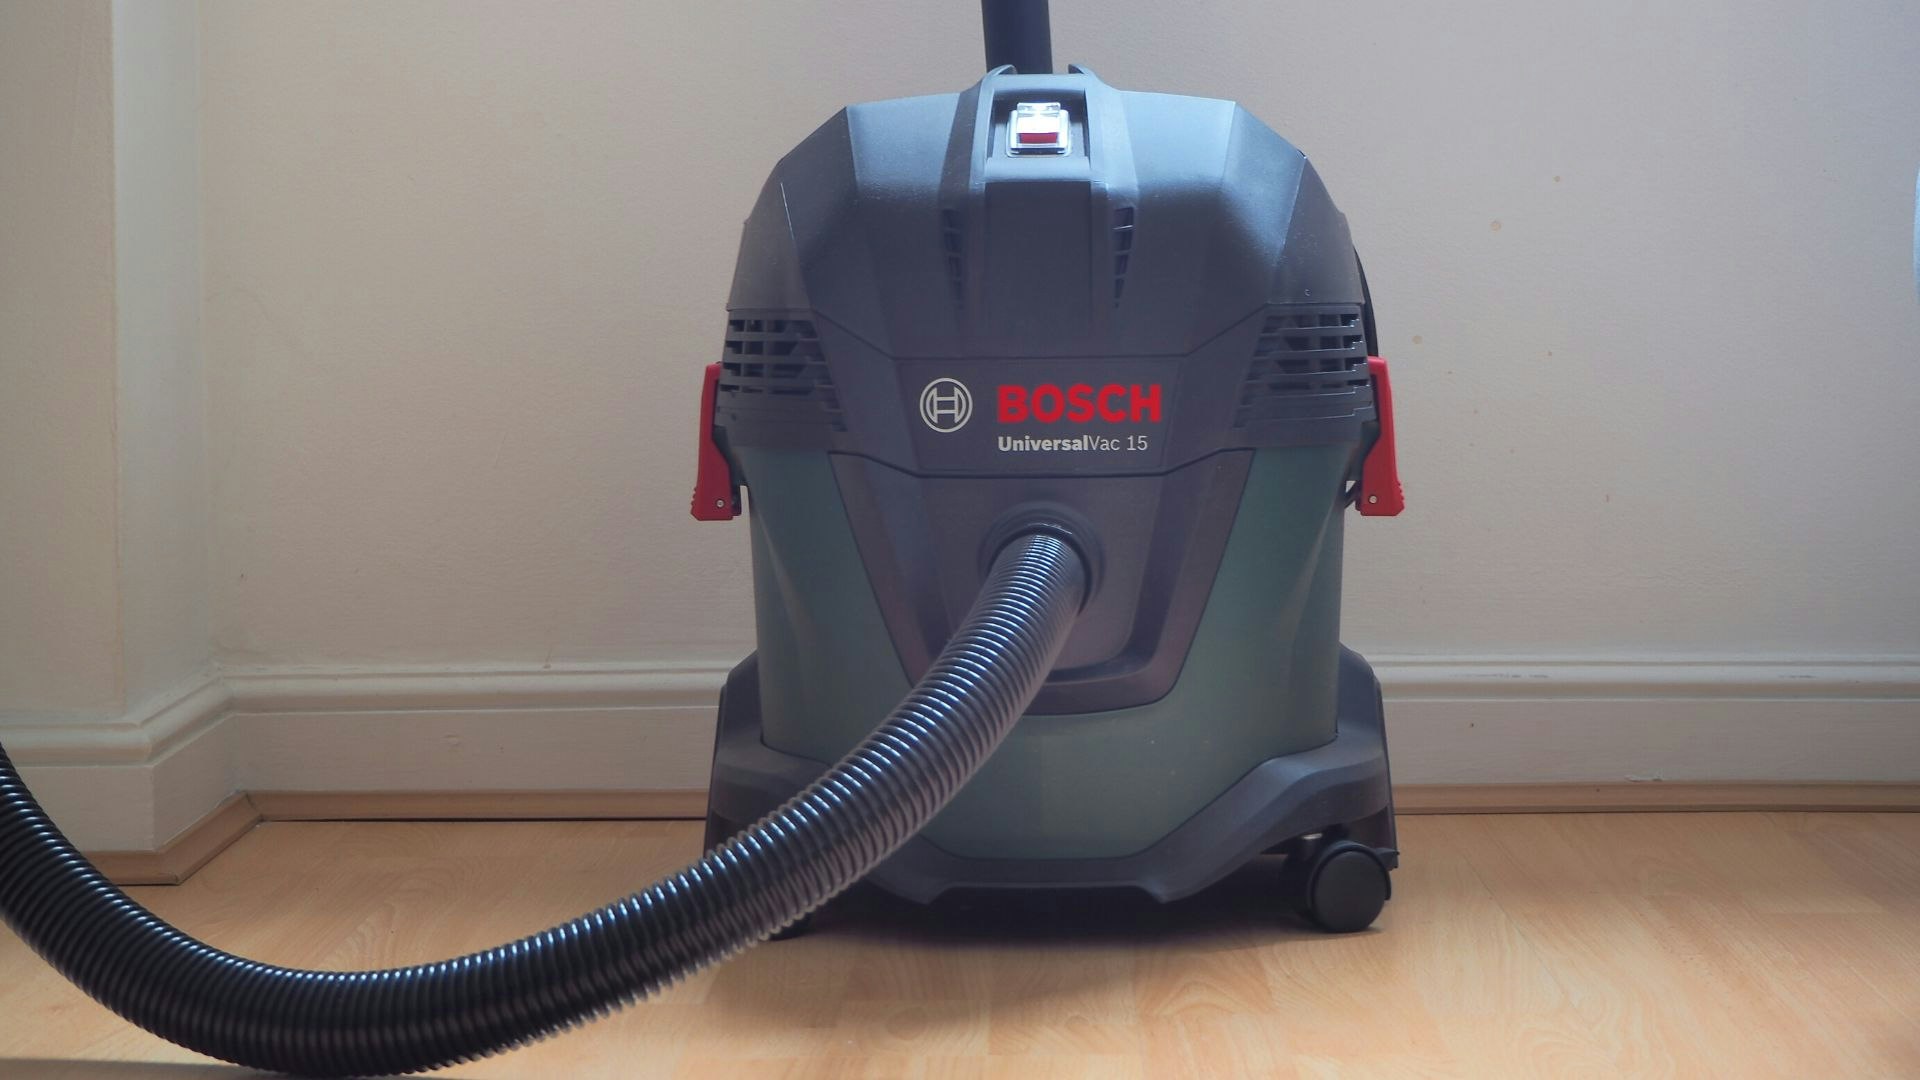 Bosch Home and Garden Cordless Wet and Dry Vacuum Cleaner